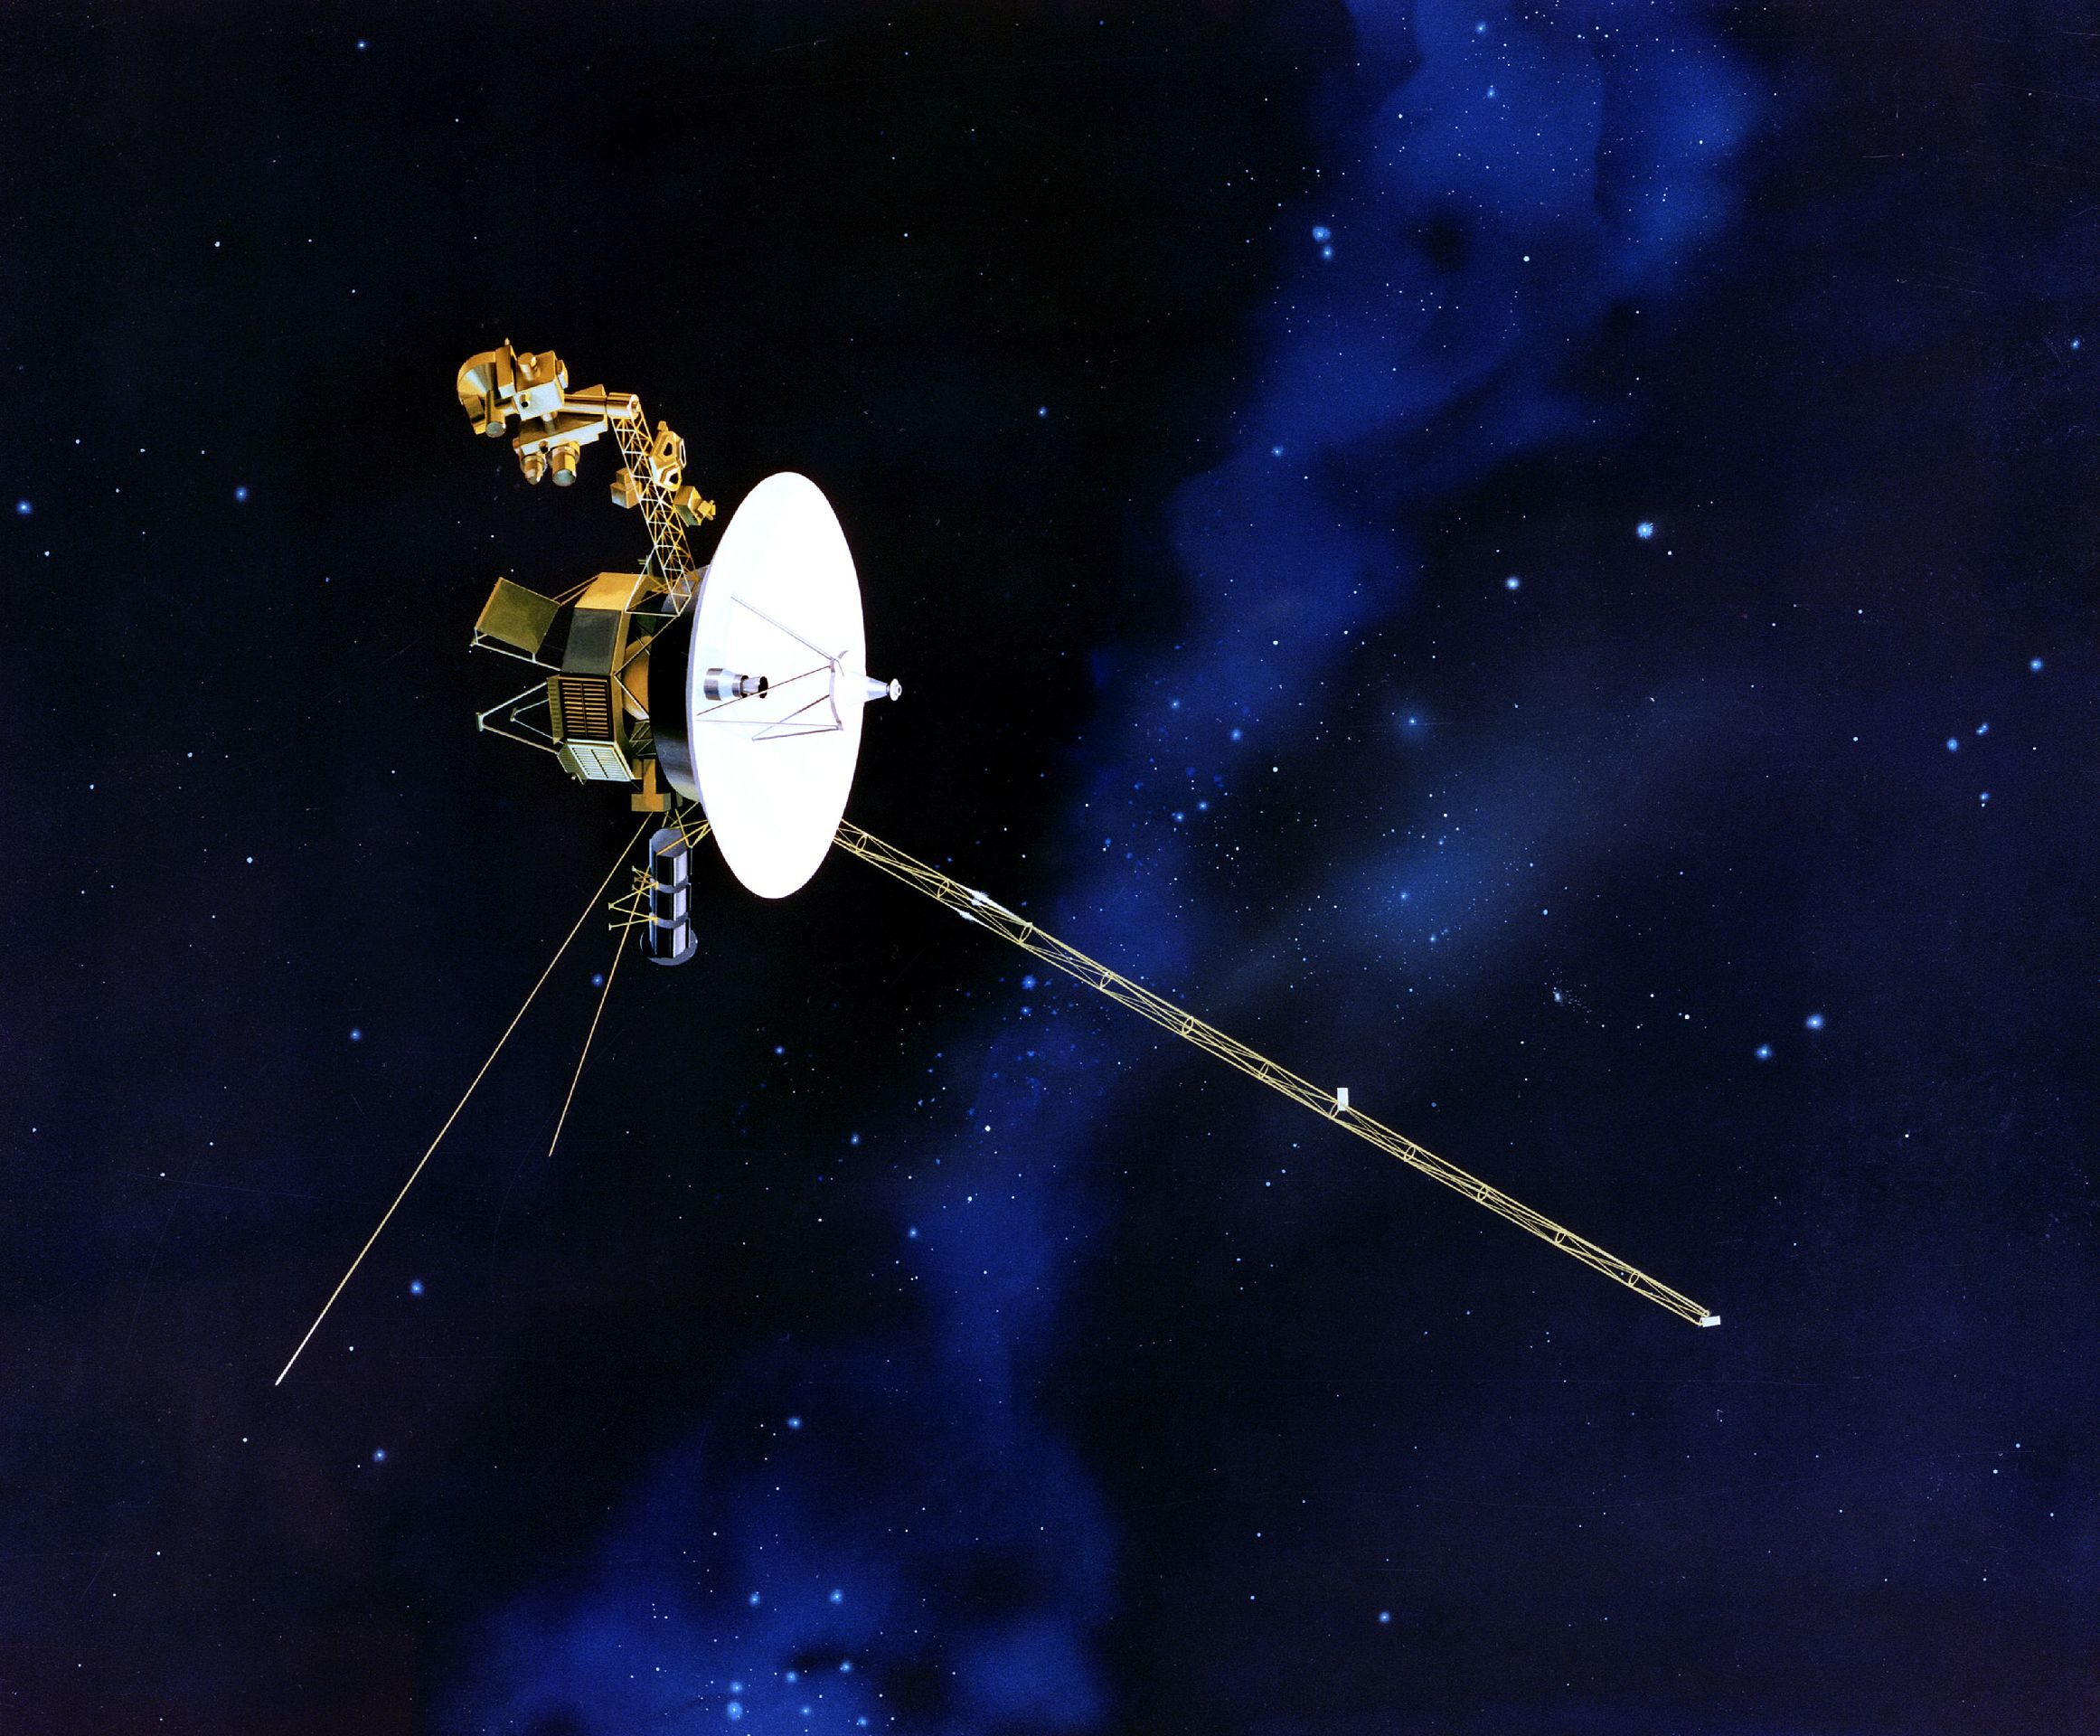 File:Voyager - mission logo.png - Wikimedia Commons